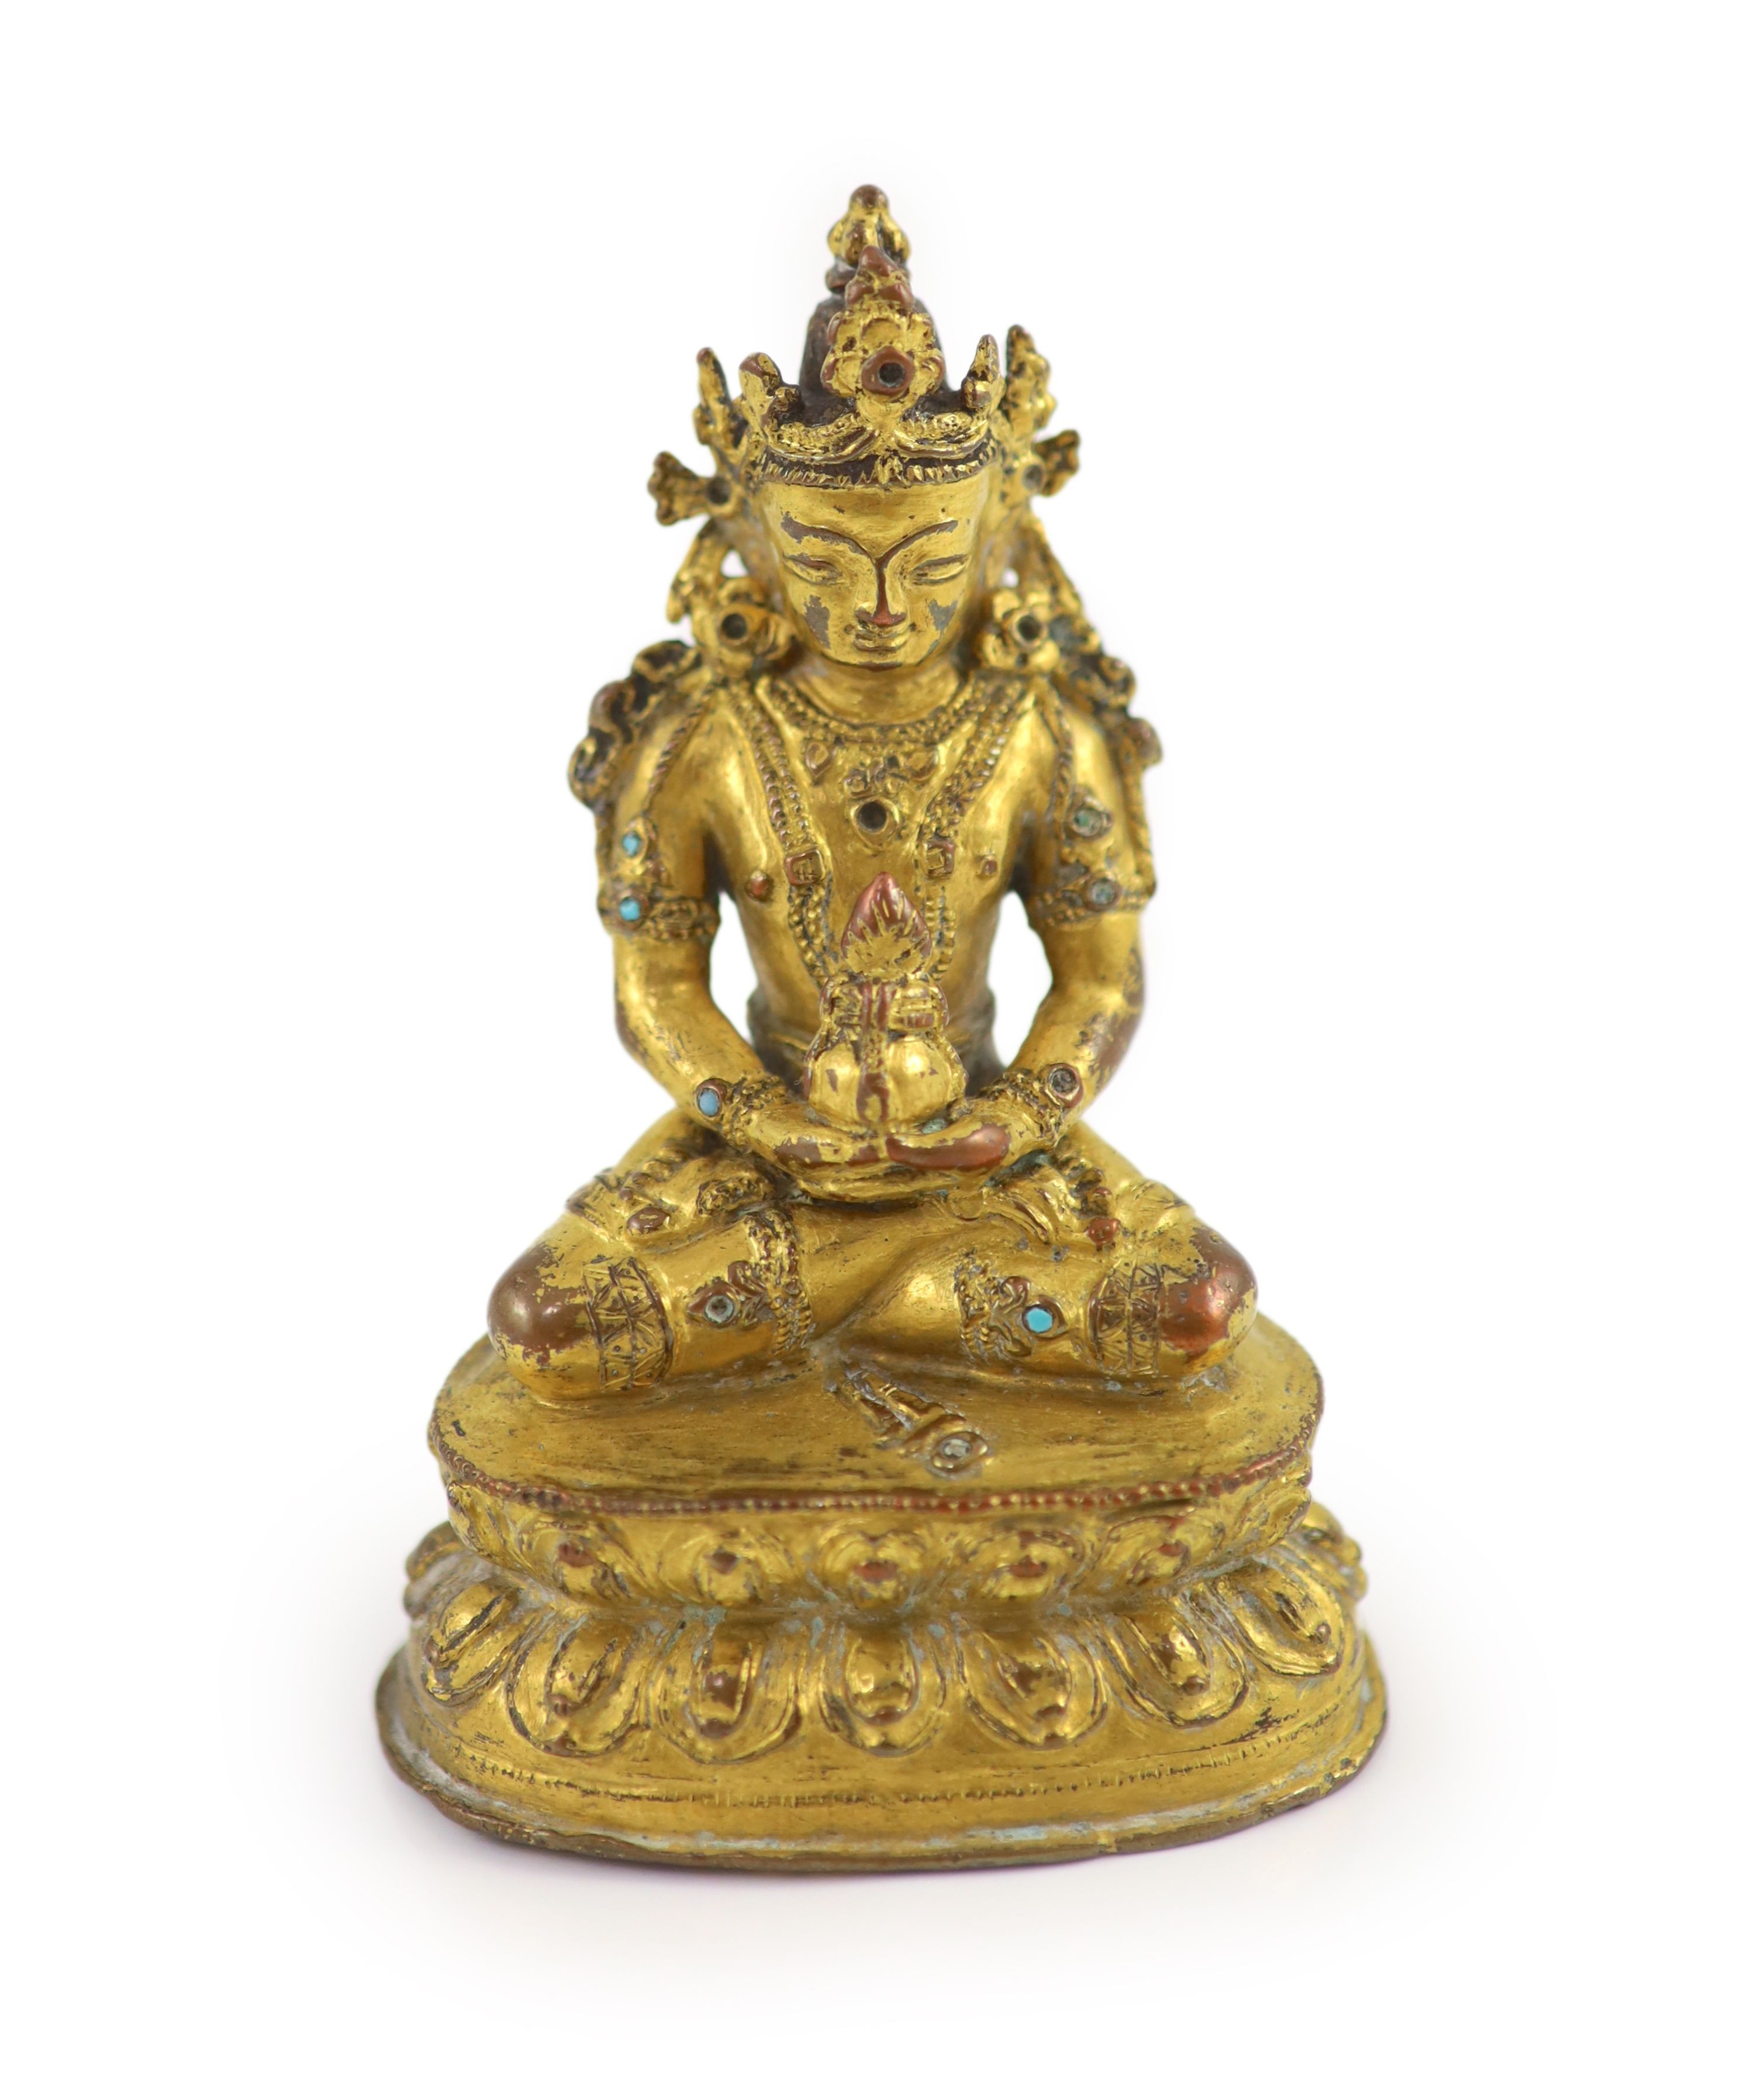 A Tibetan gilt copper alloy seated figure of Amitayus, possibly 15th/16th century, 9cm high